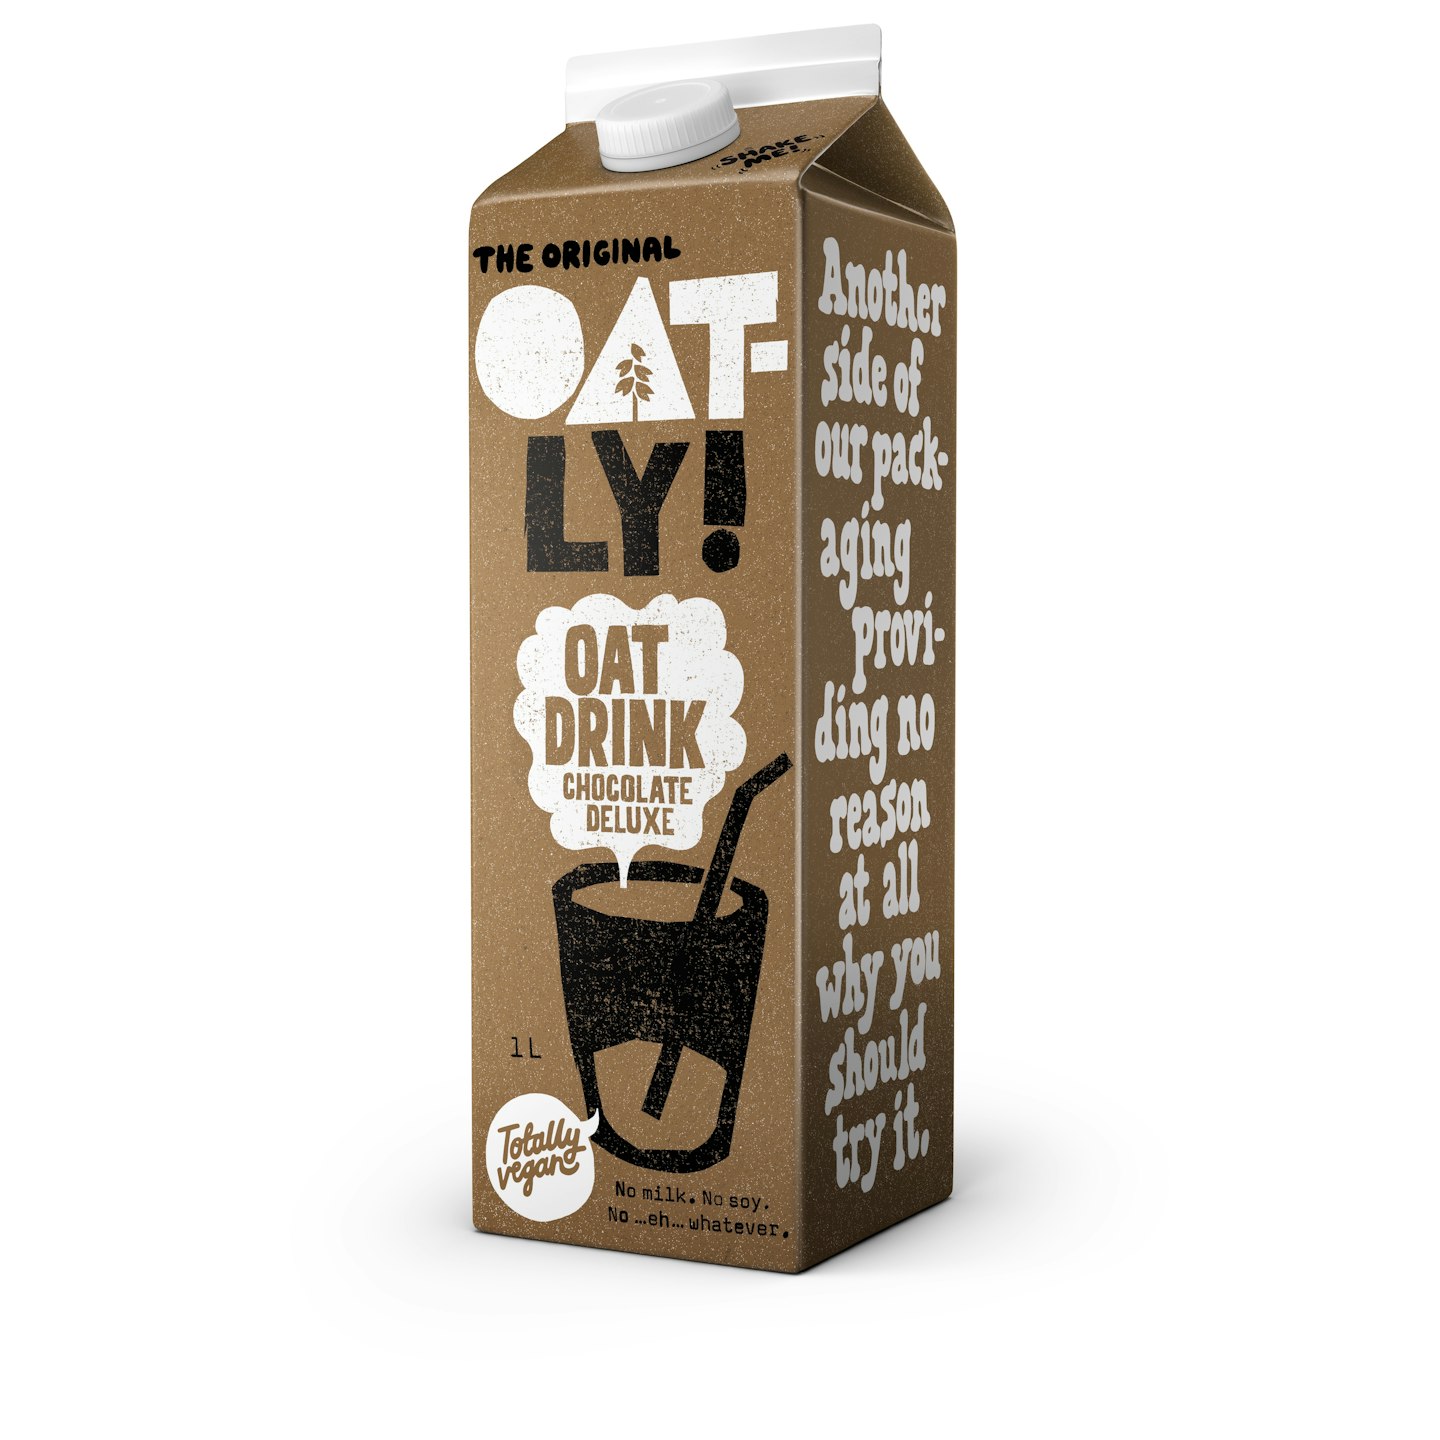 Oat Drink Chocolate Deluxe, 1L